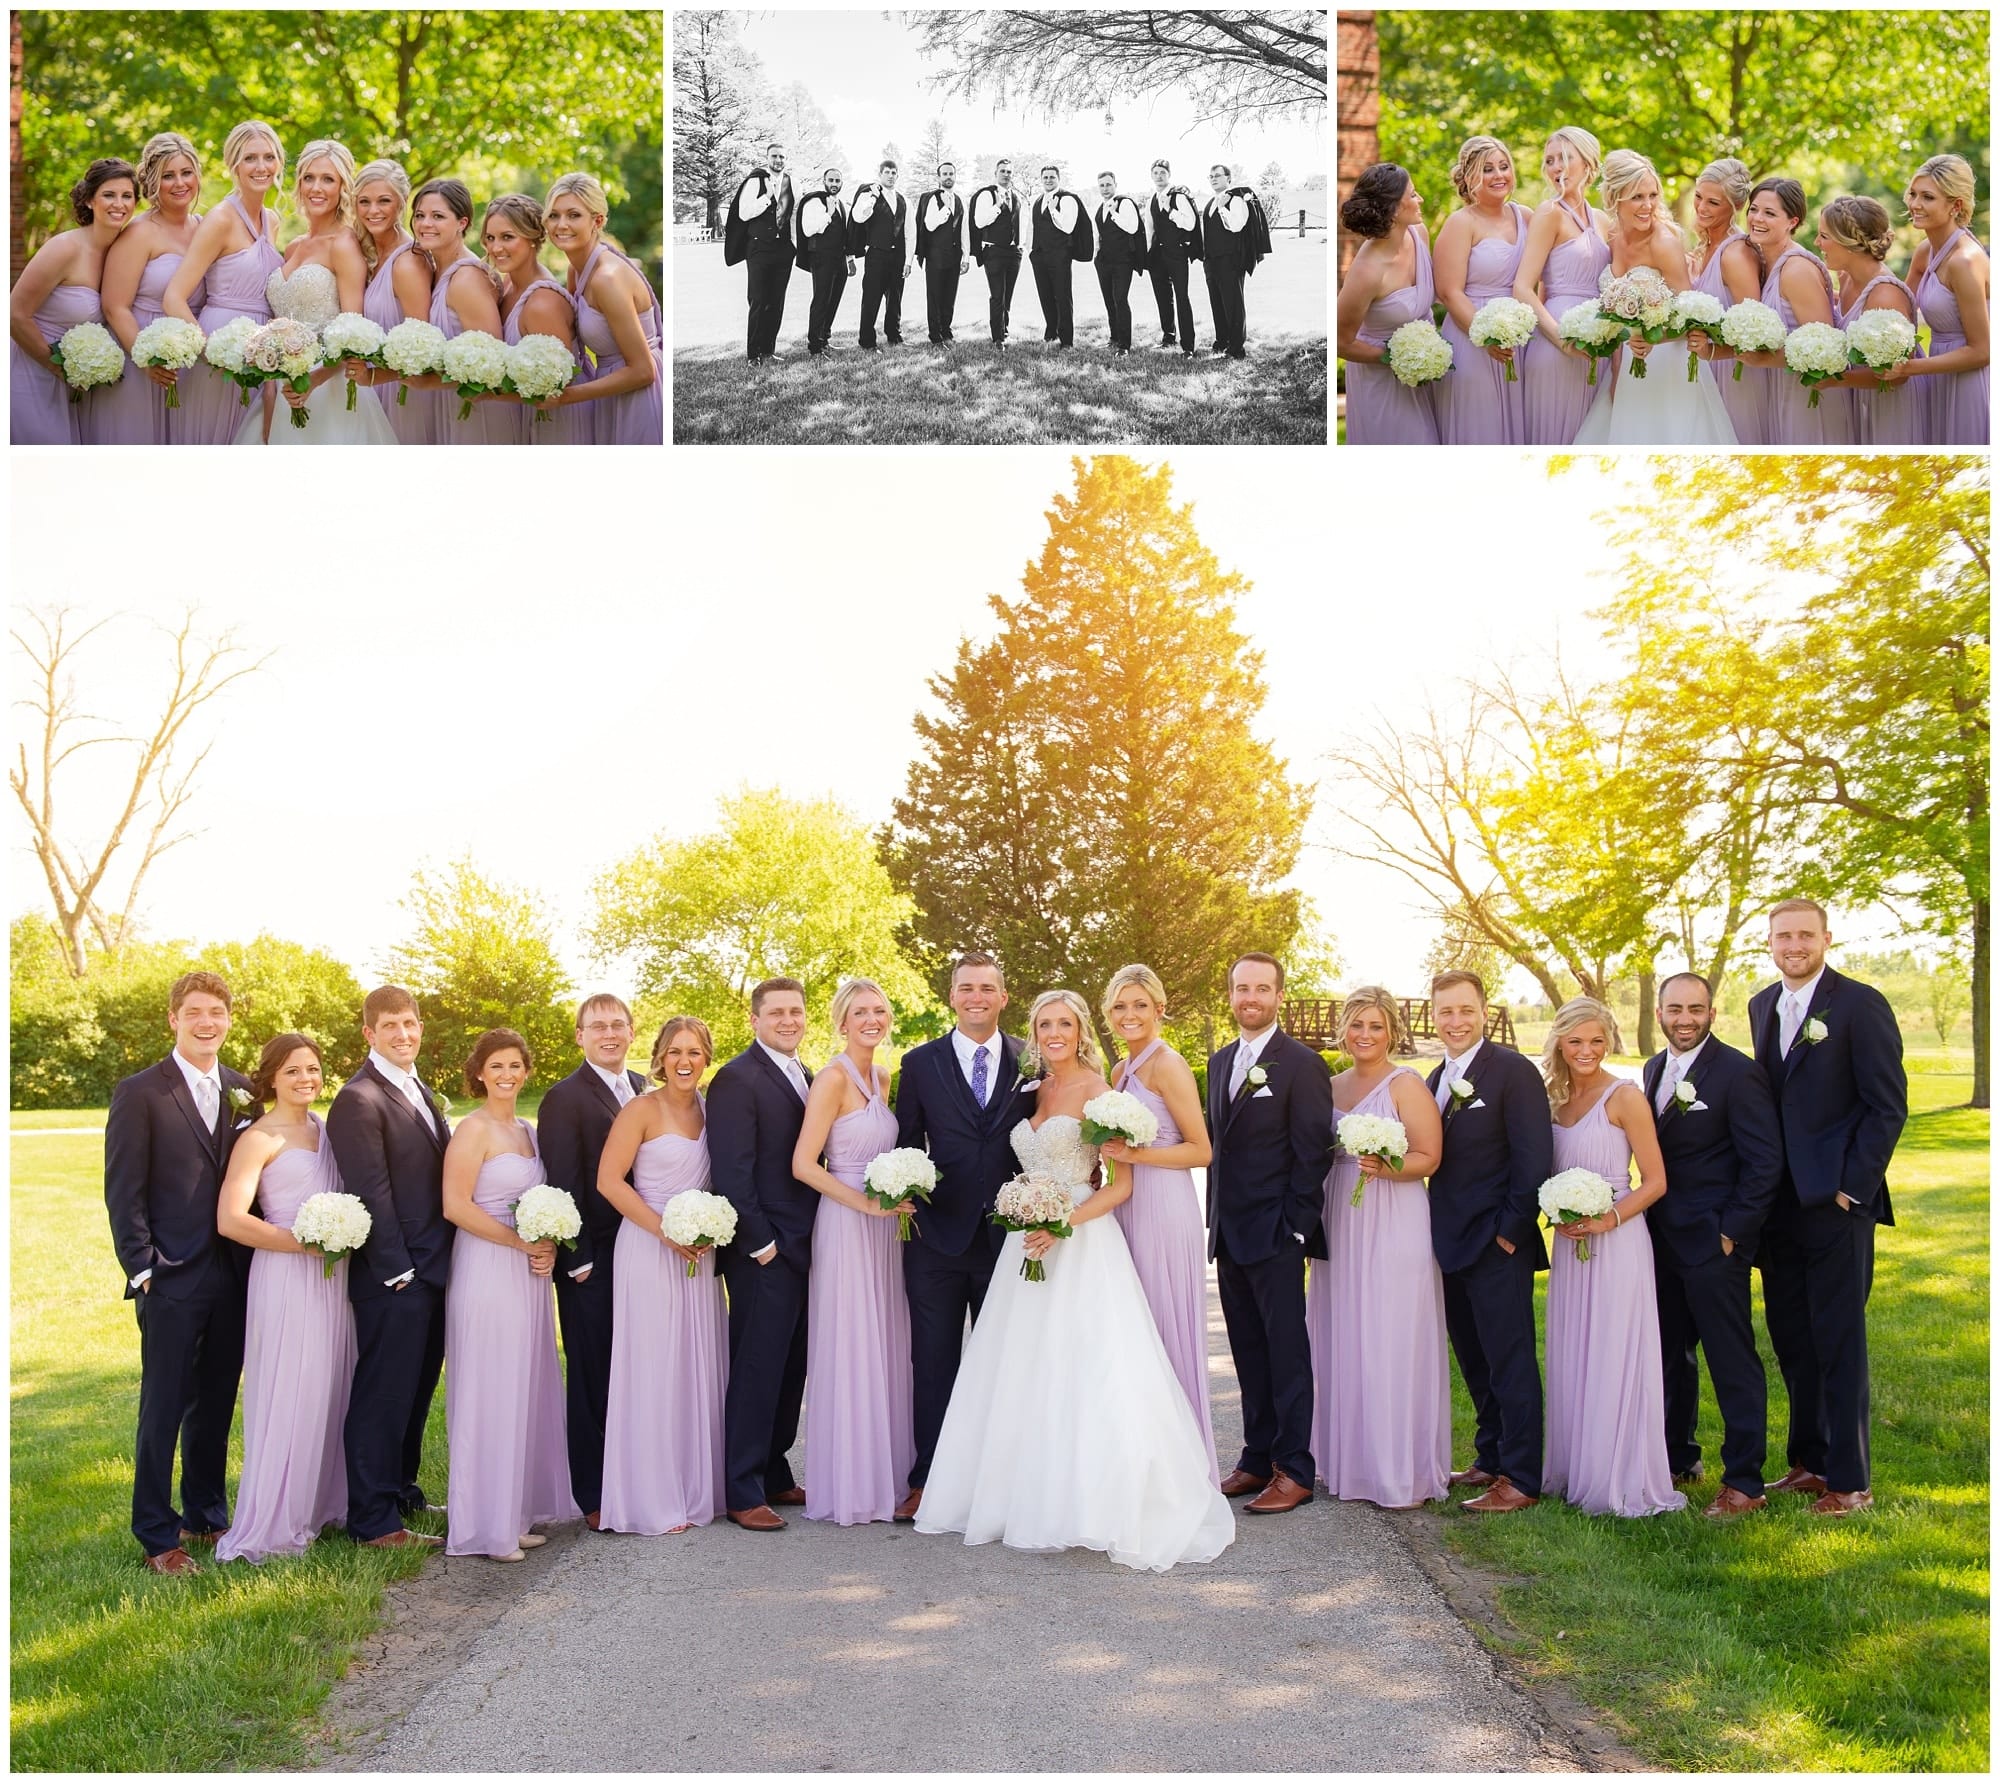 Odyessy_Country_Club_Tinley_Park_Wedding_Photographer_Laura_Meyer_Photography_2012